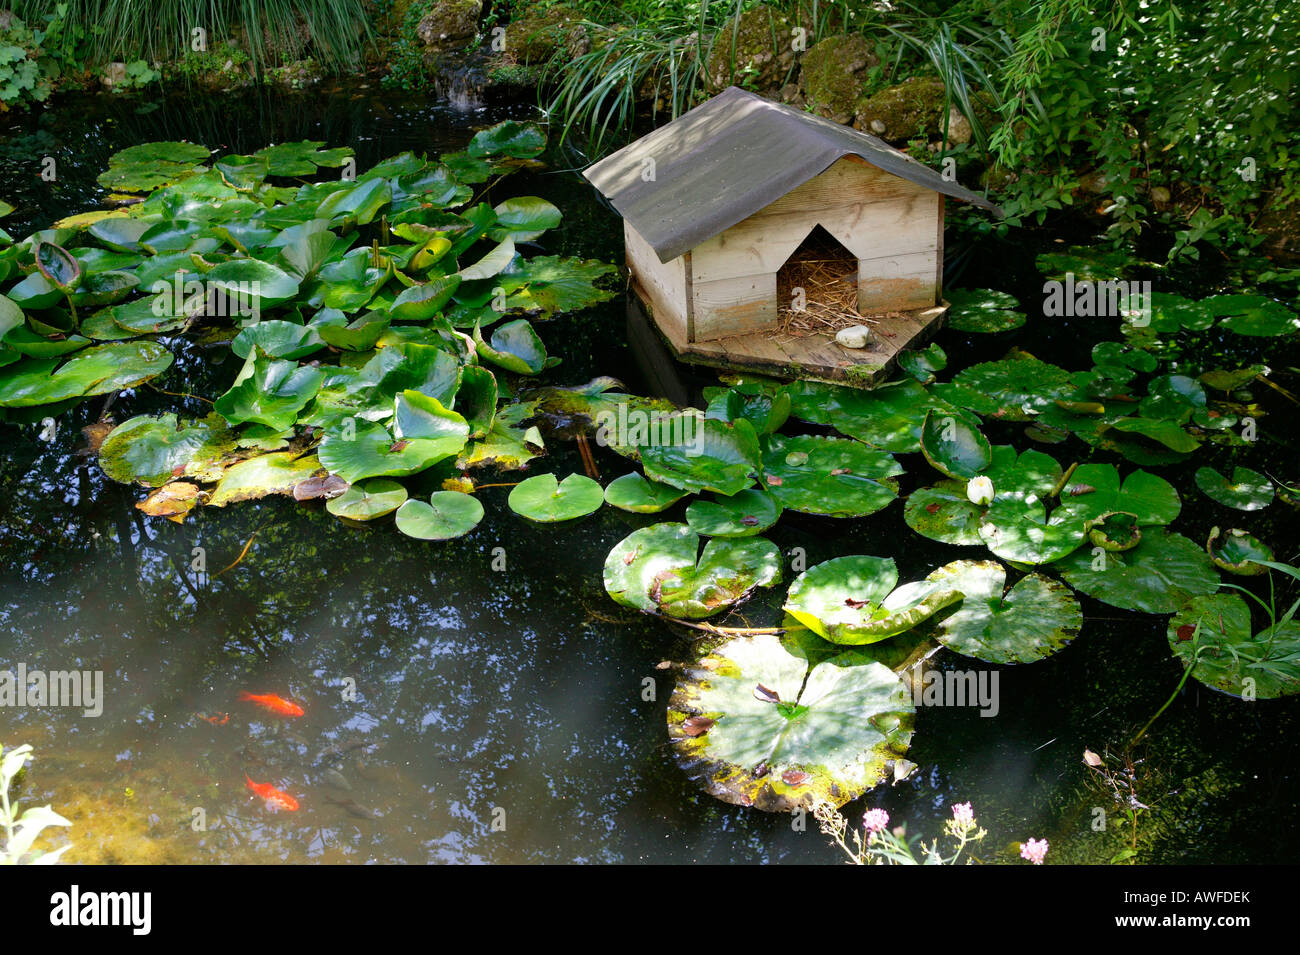 Goldfish pond and duck house in a garden, Upper Bavaria, Bavaria, Germany, Europe Stock Photo